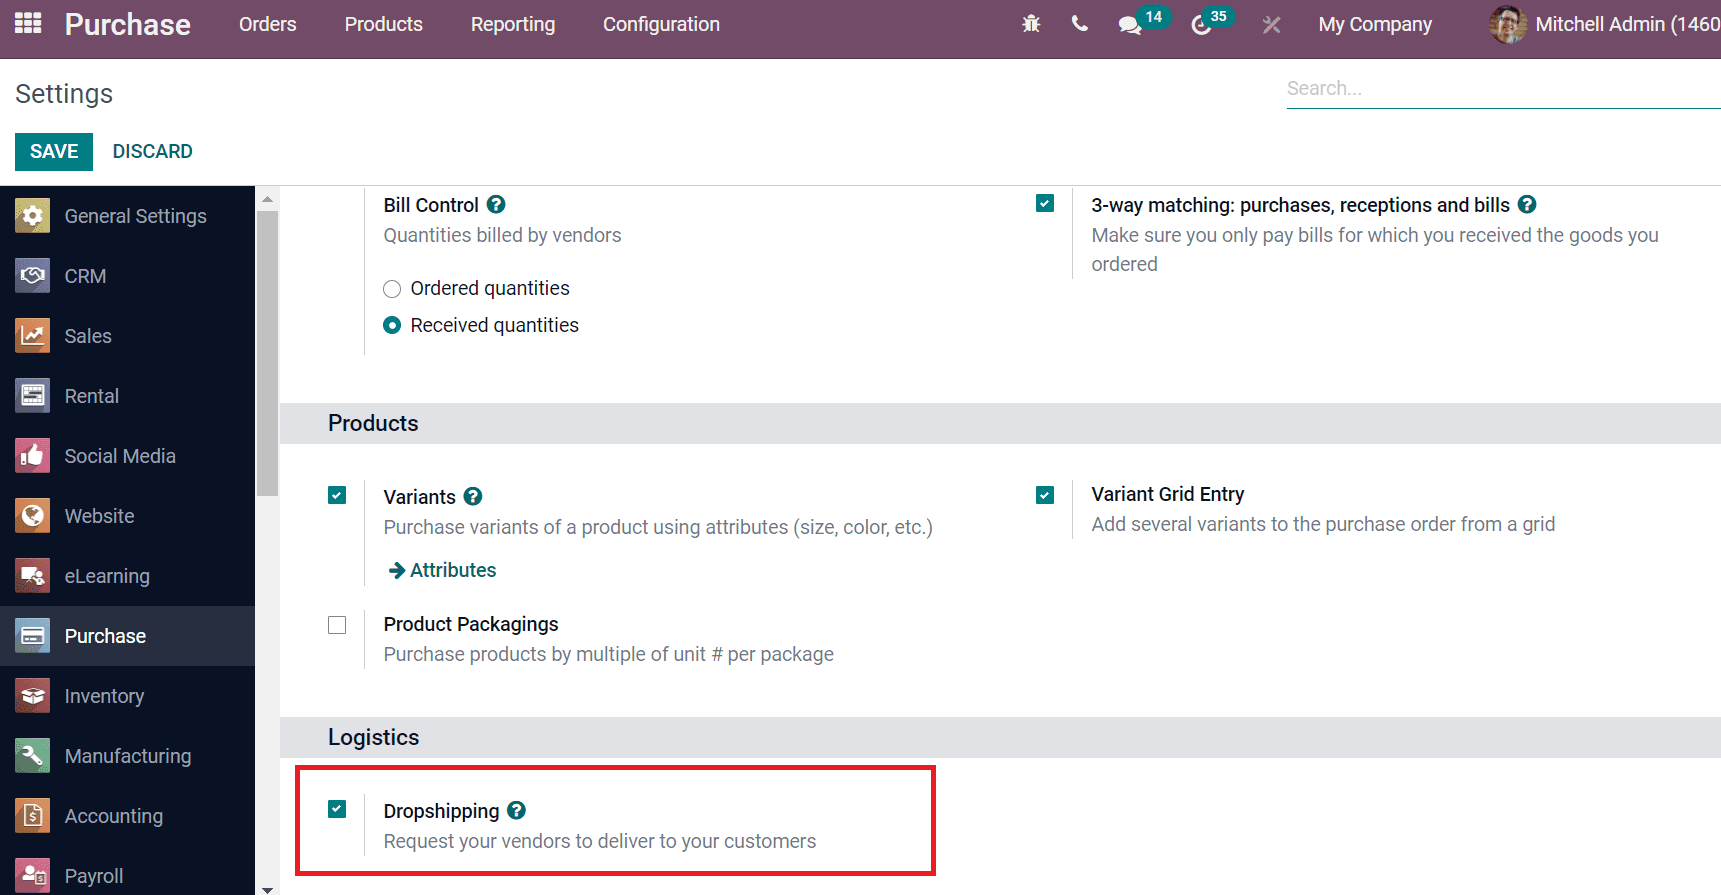 how-to-use-subcontracting-in-odoo-15-manufacturing-module-cybrosys